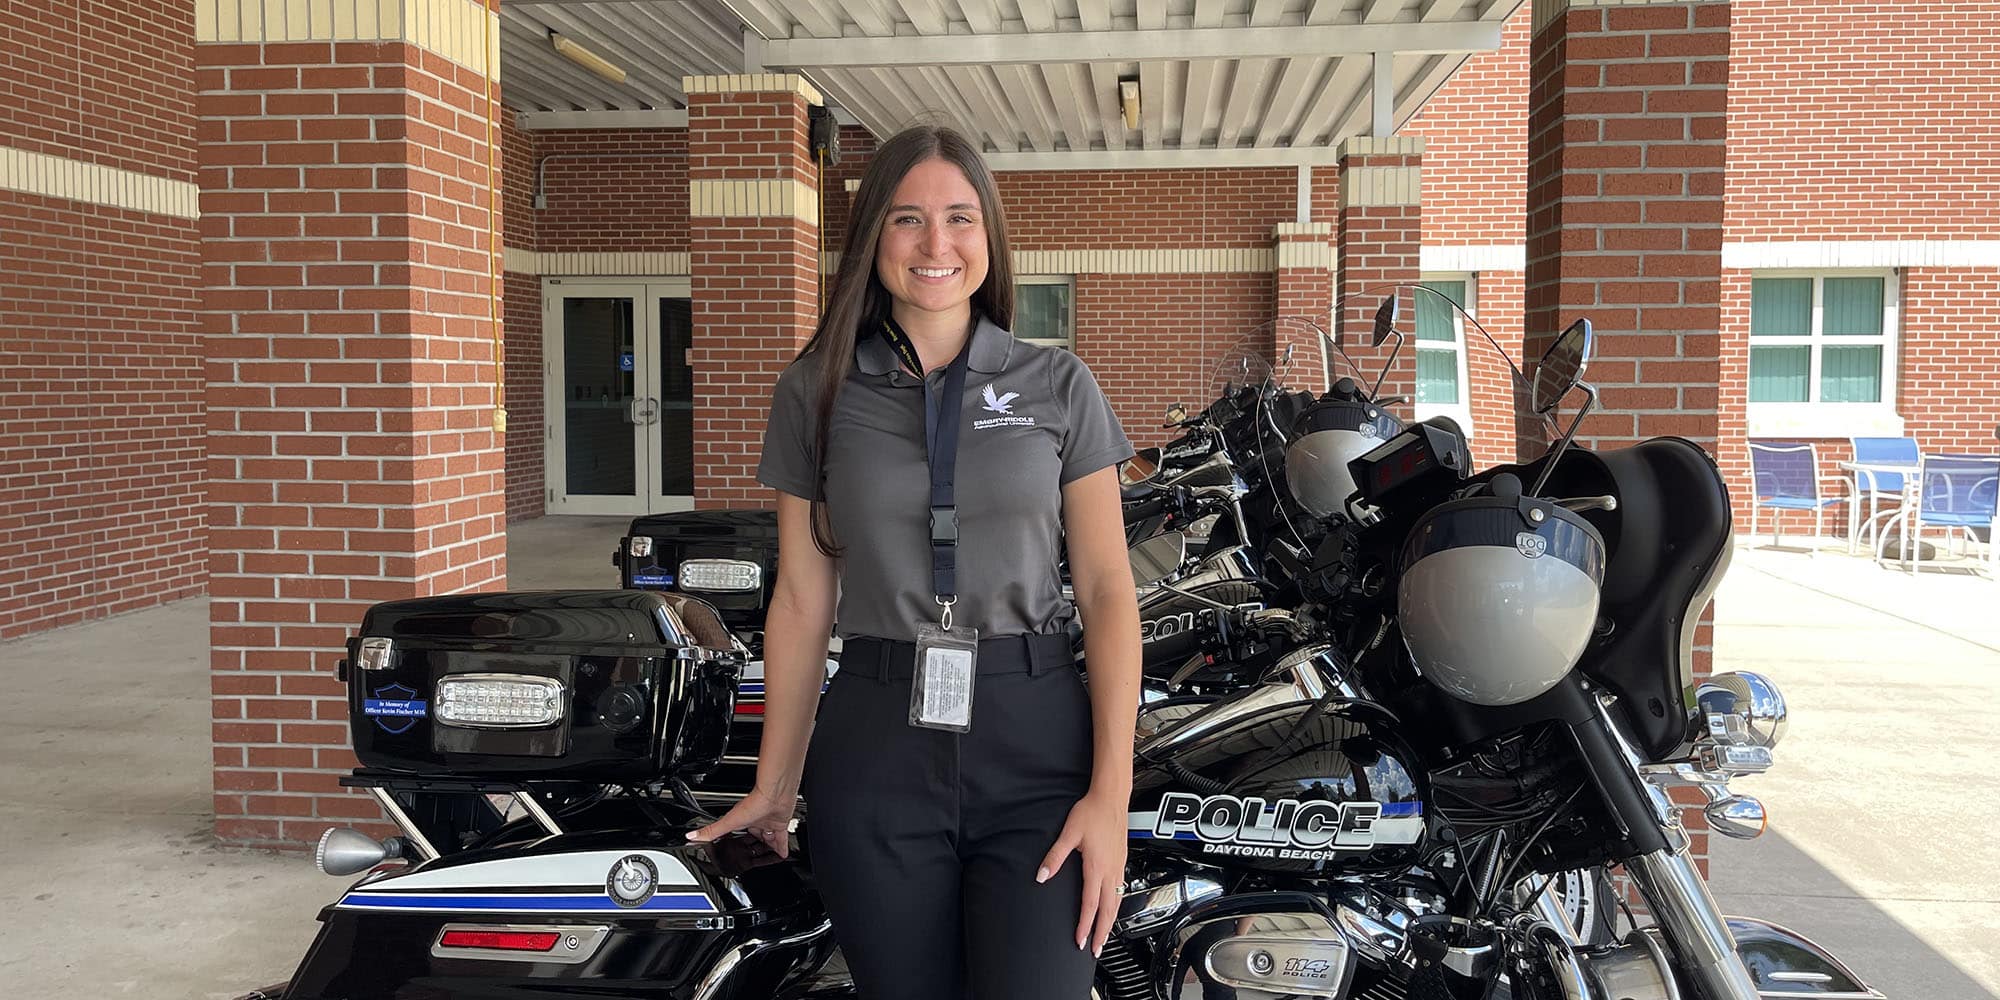 Hannah, a woman with light skin tone and long brown hair, stands in front of a line of parked motorcycles with Daytona Beach Police imprint. She's wearing a grey polo with an Embry-Riddle eagle and an id on a lanyard.